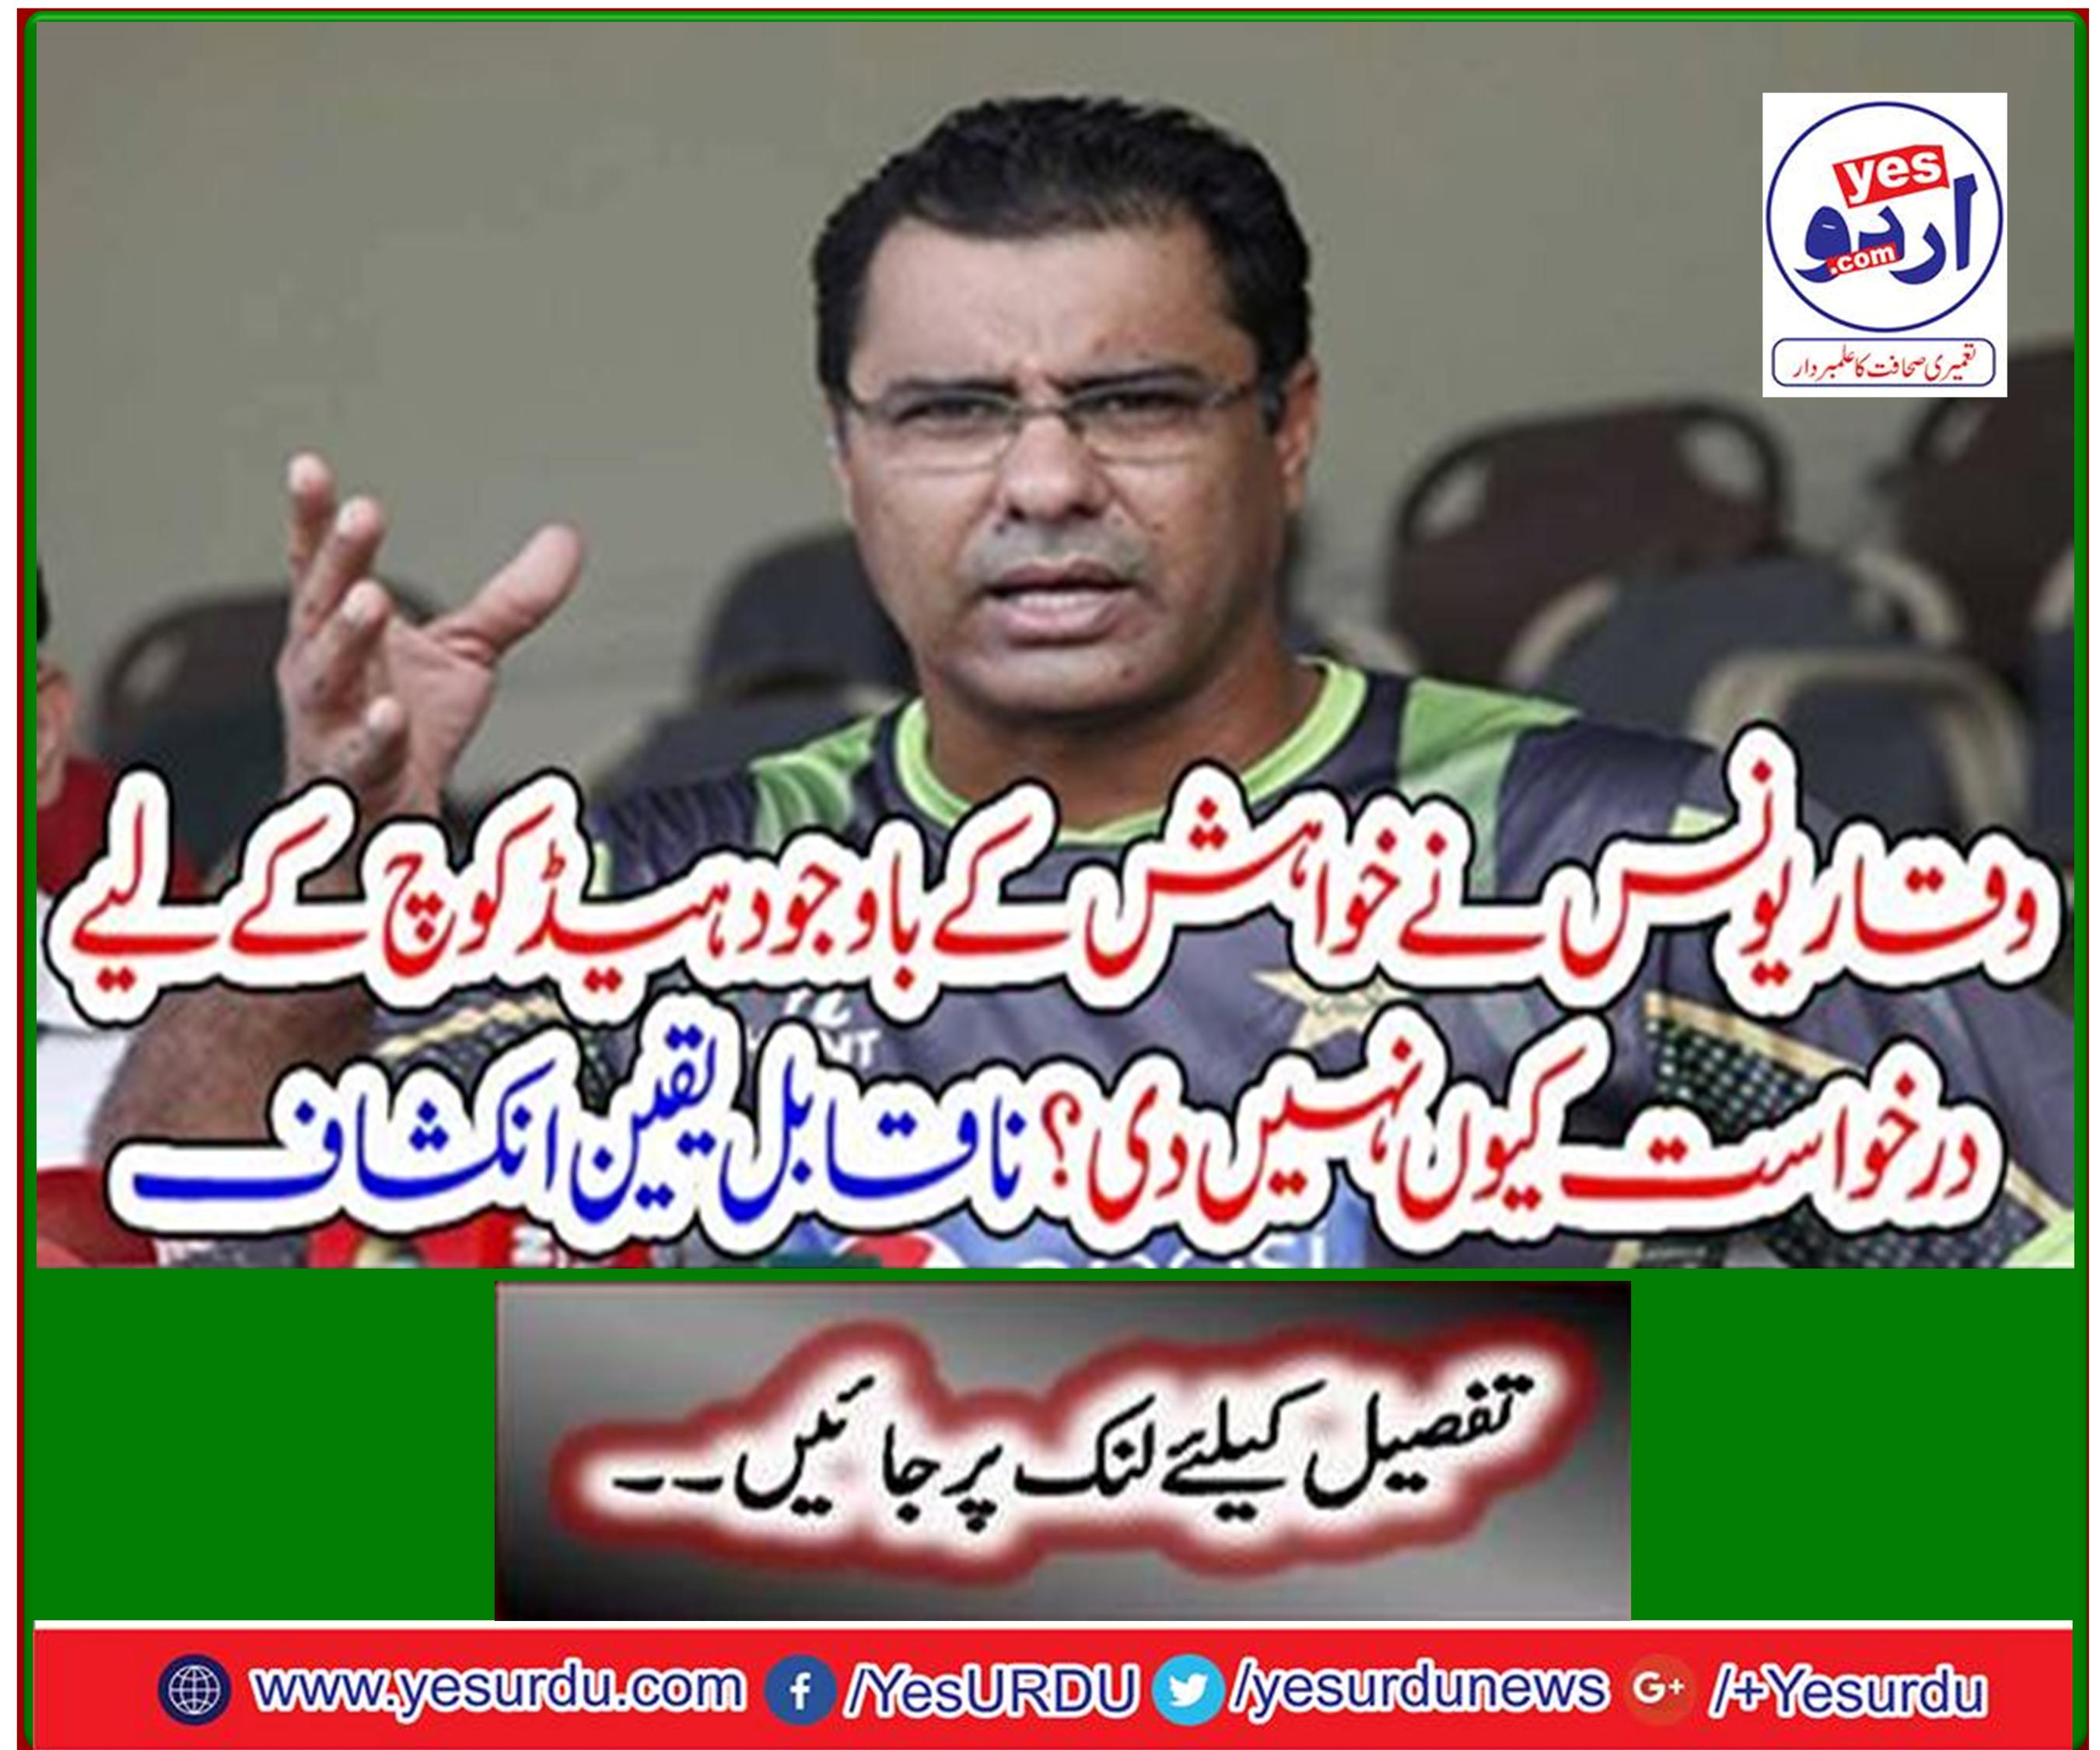 Why didn't Waqar Younis apply for a head coach despite his desire? Incredible discovery